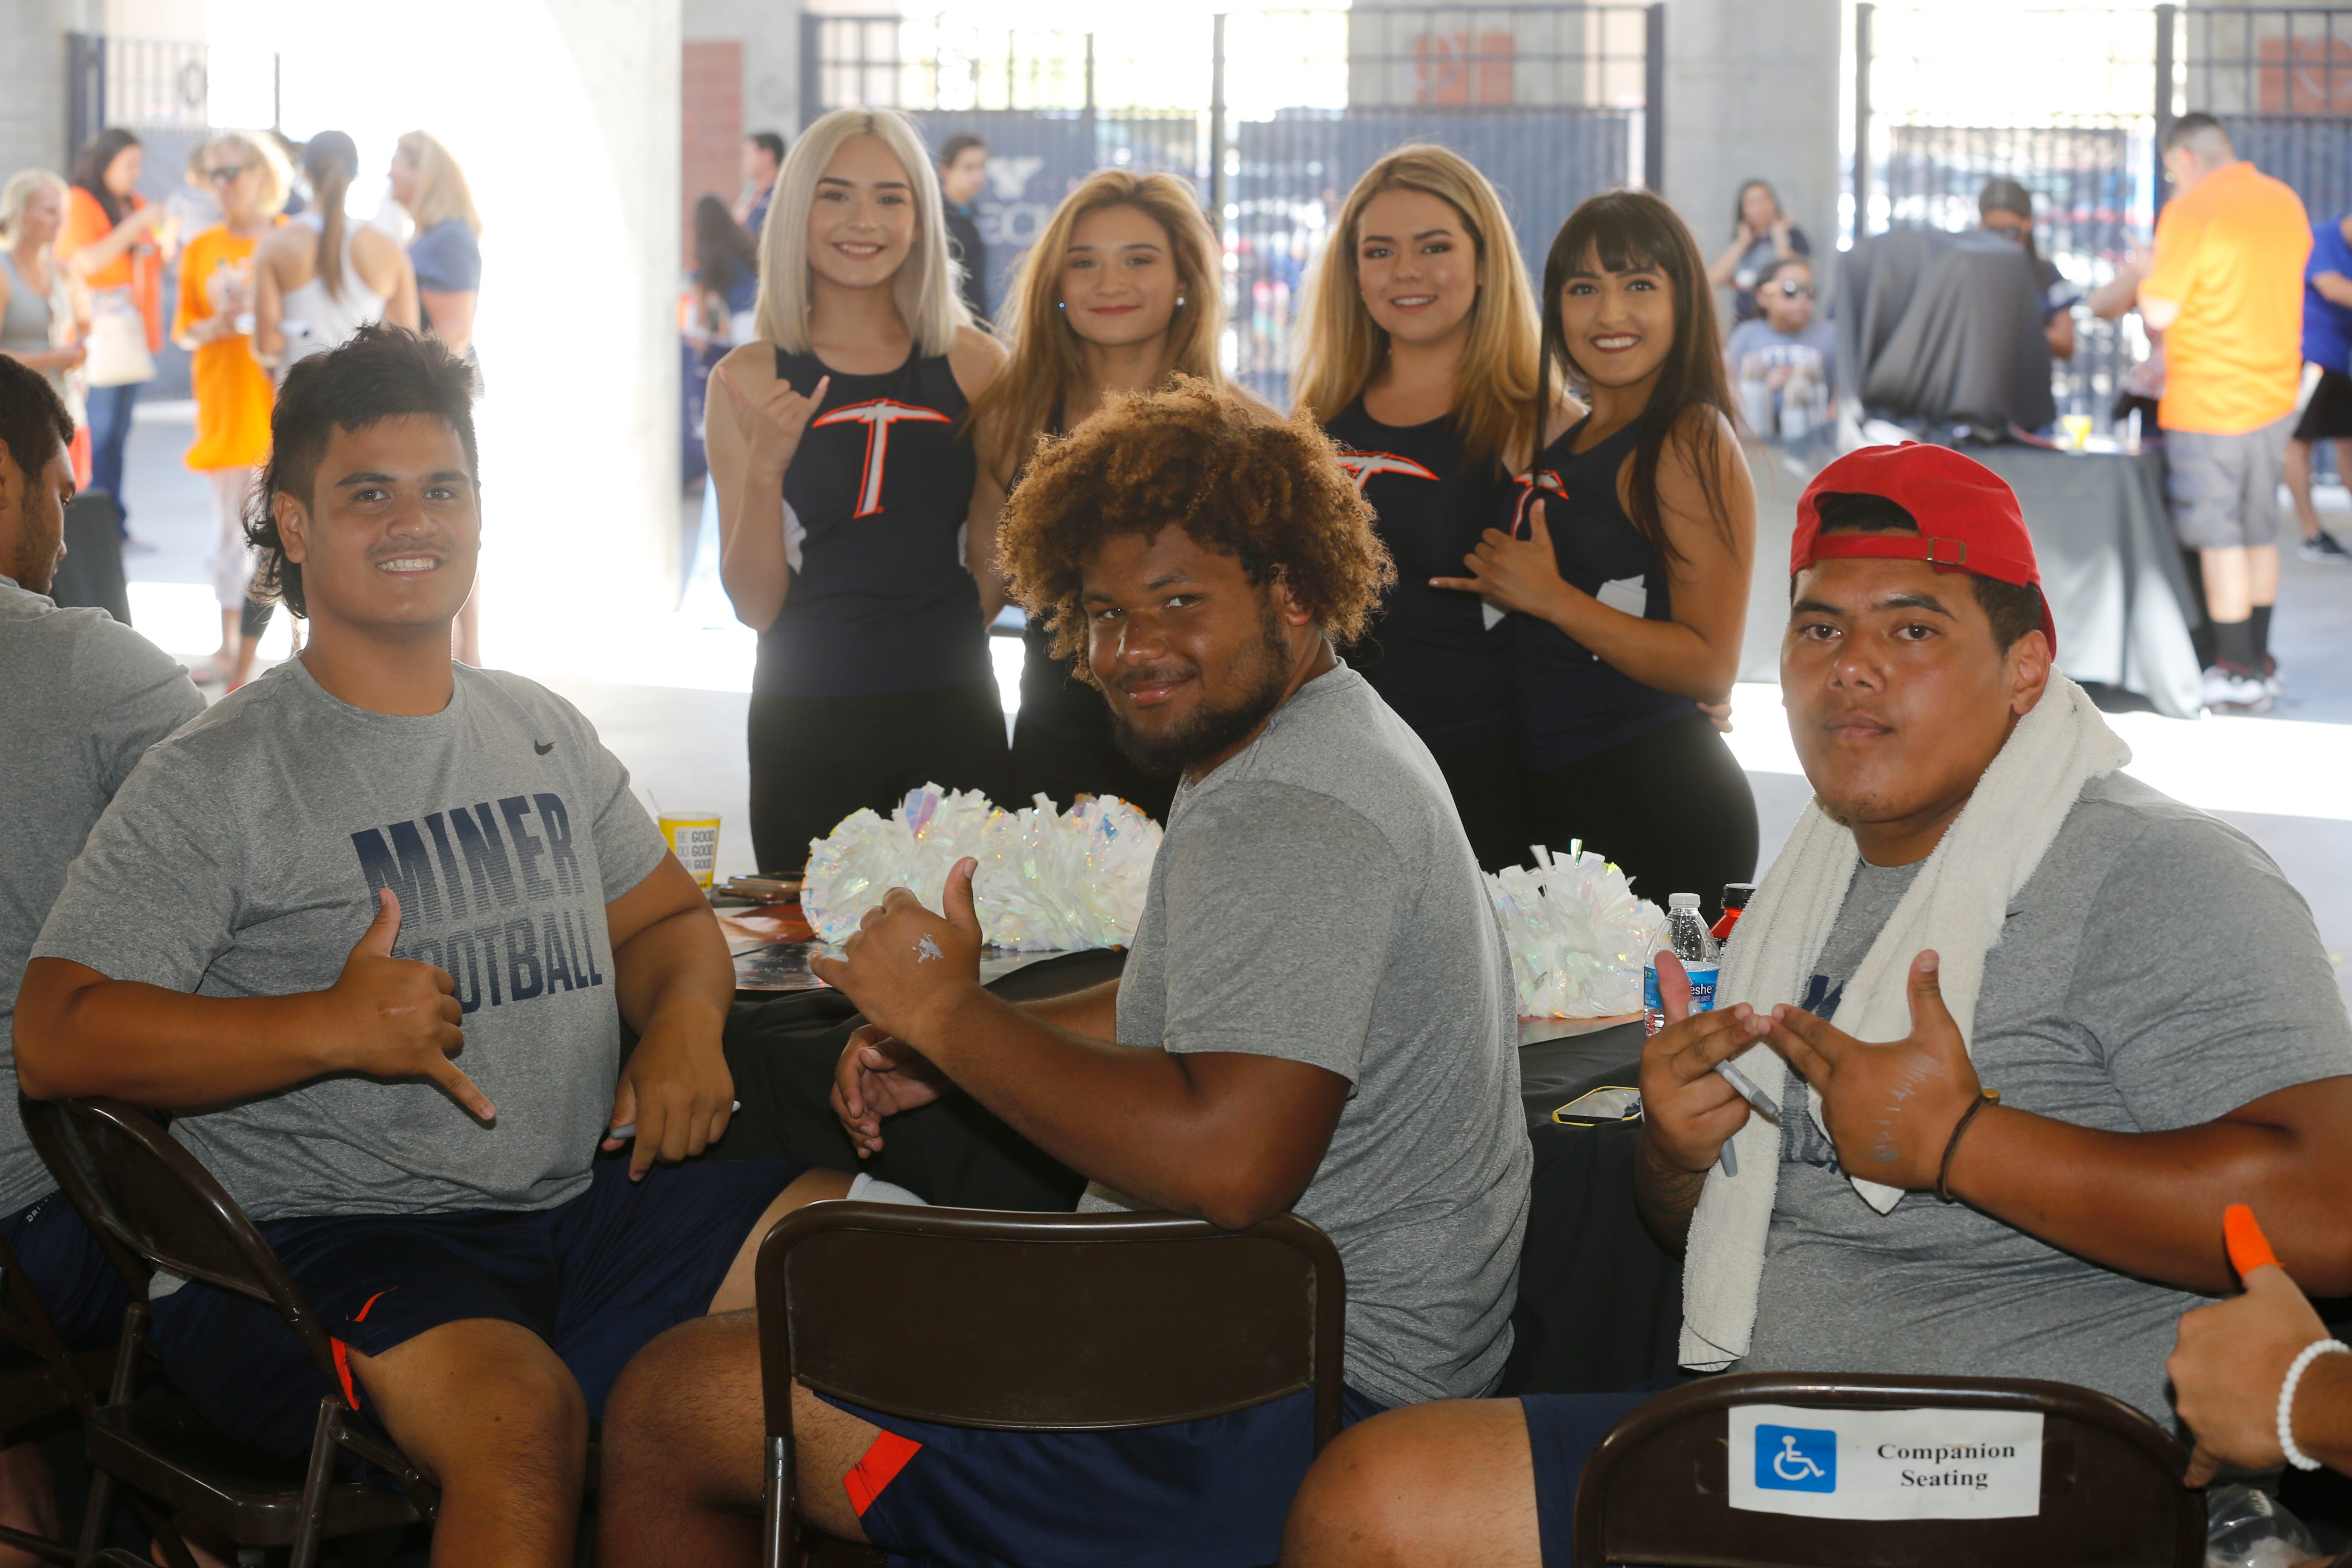 Hundreds get to meet UTEP players, coaches during Fan Day